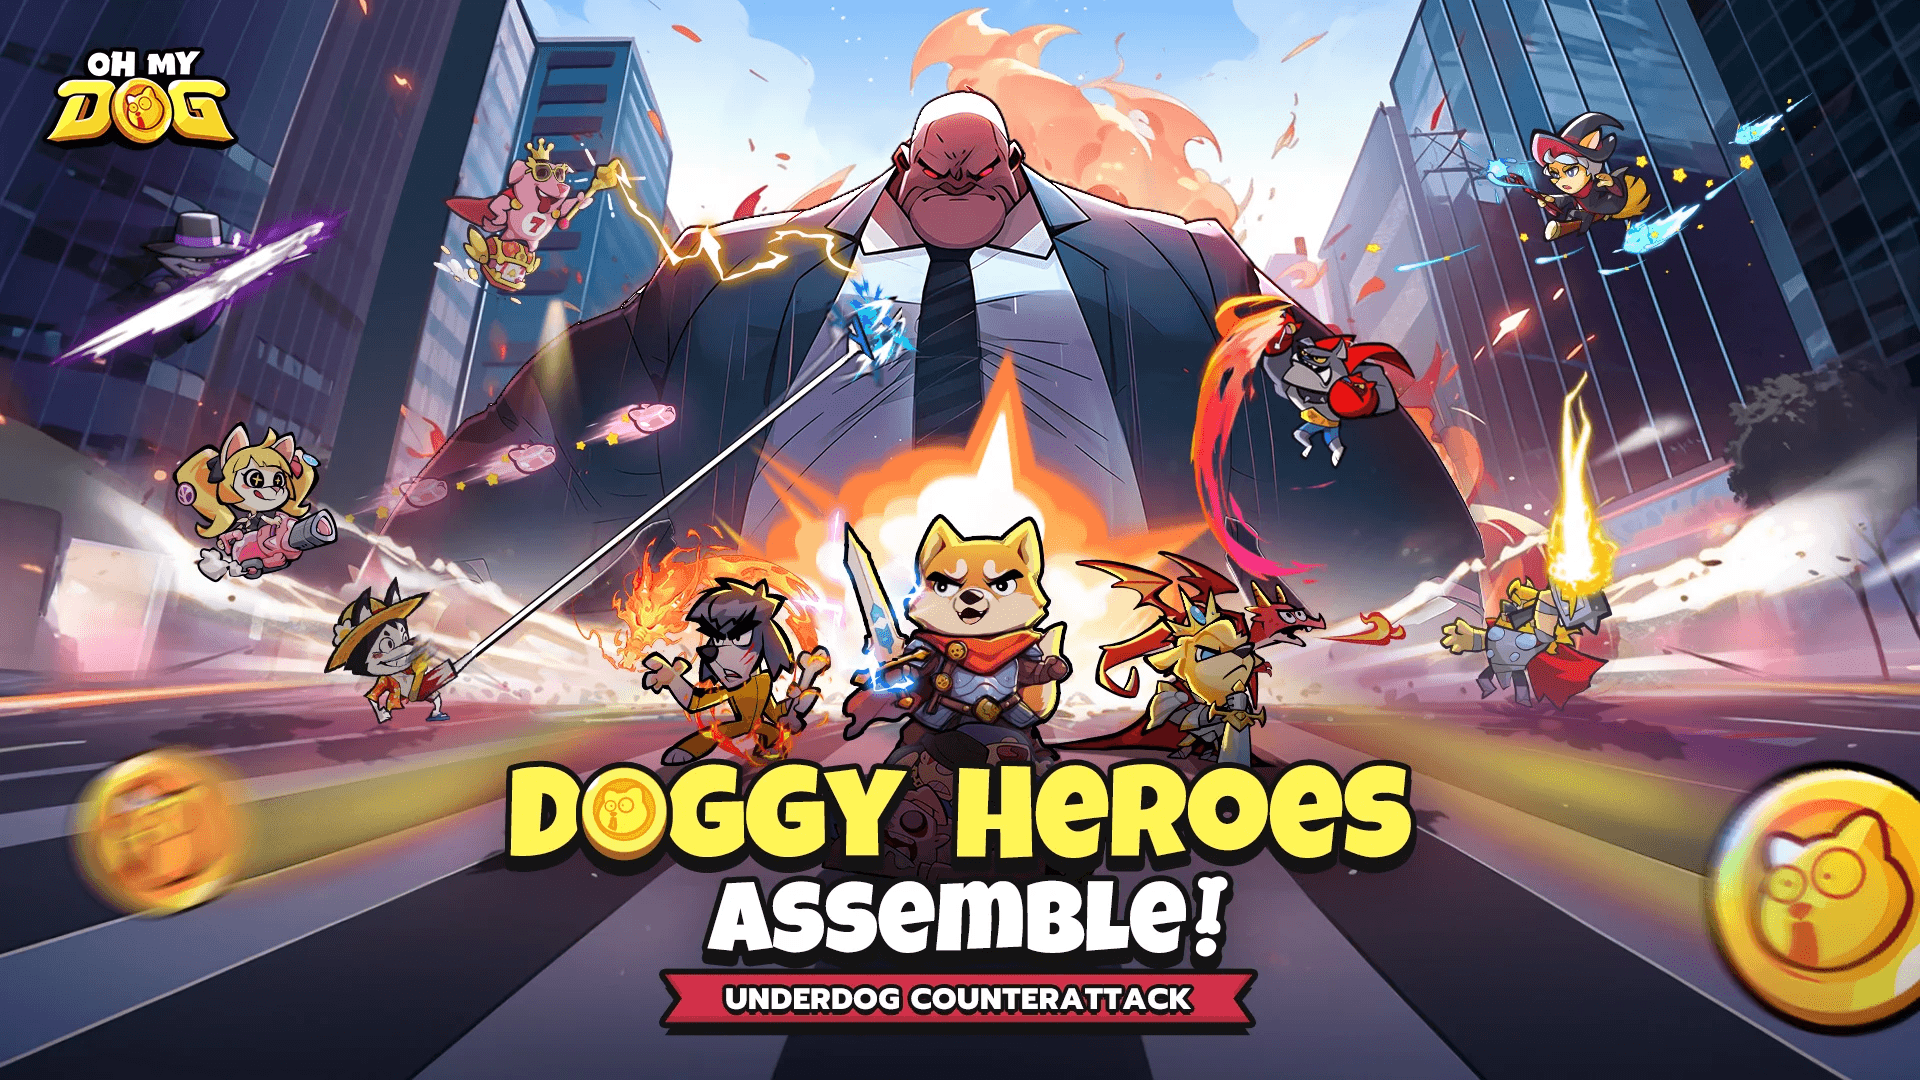 How to Play Oh My Dog - Heroes Assemble on PC or Mac with BlueStacks